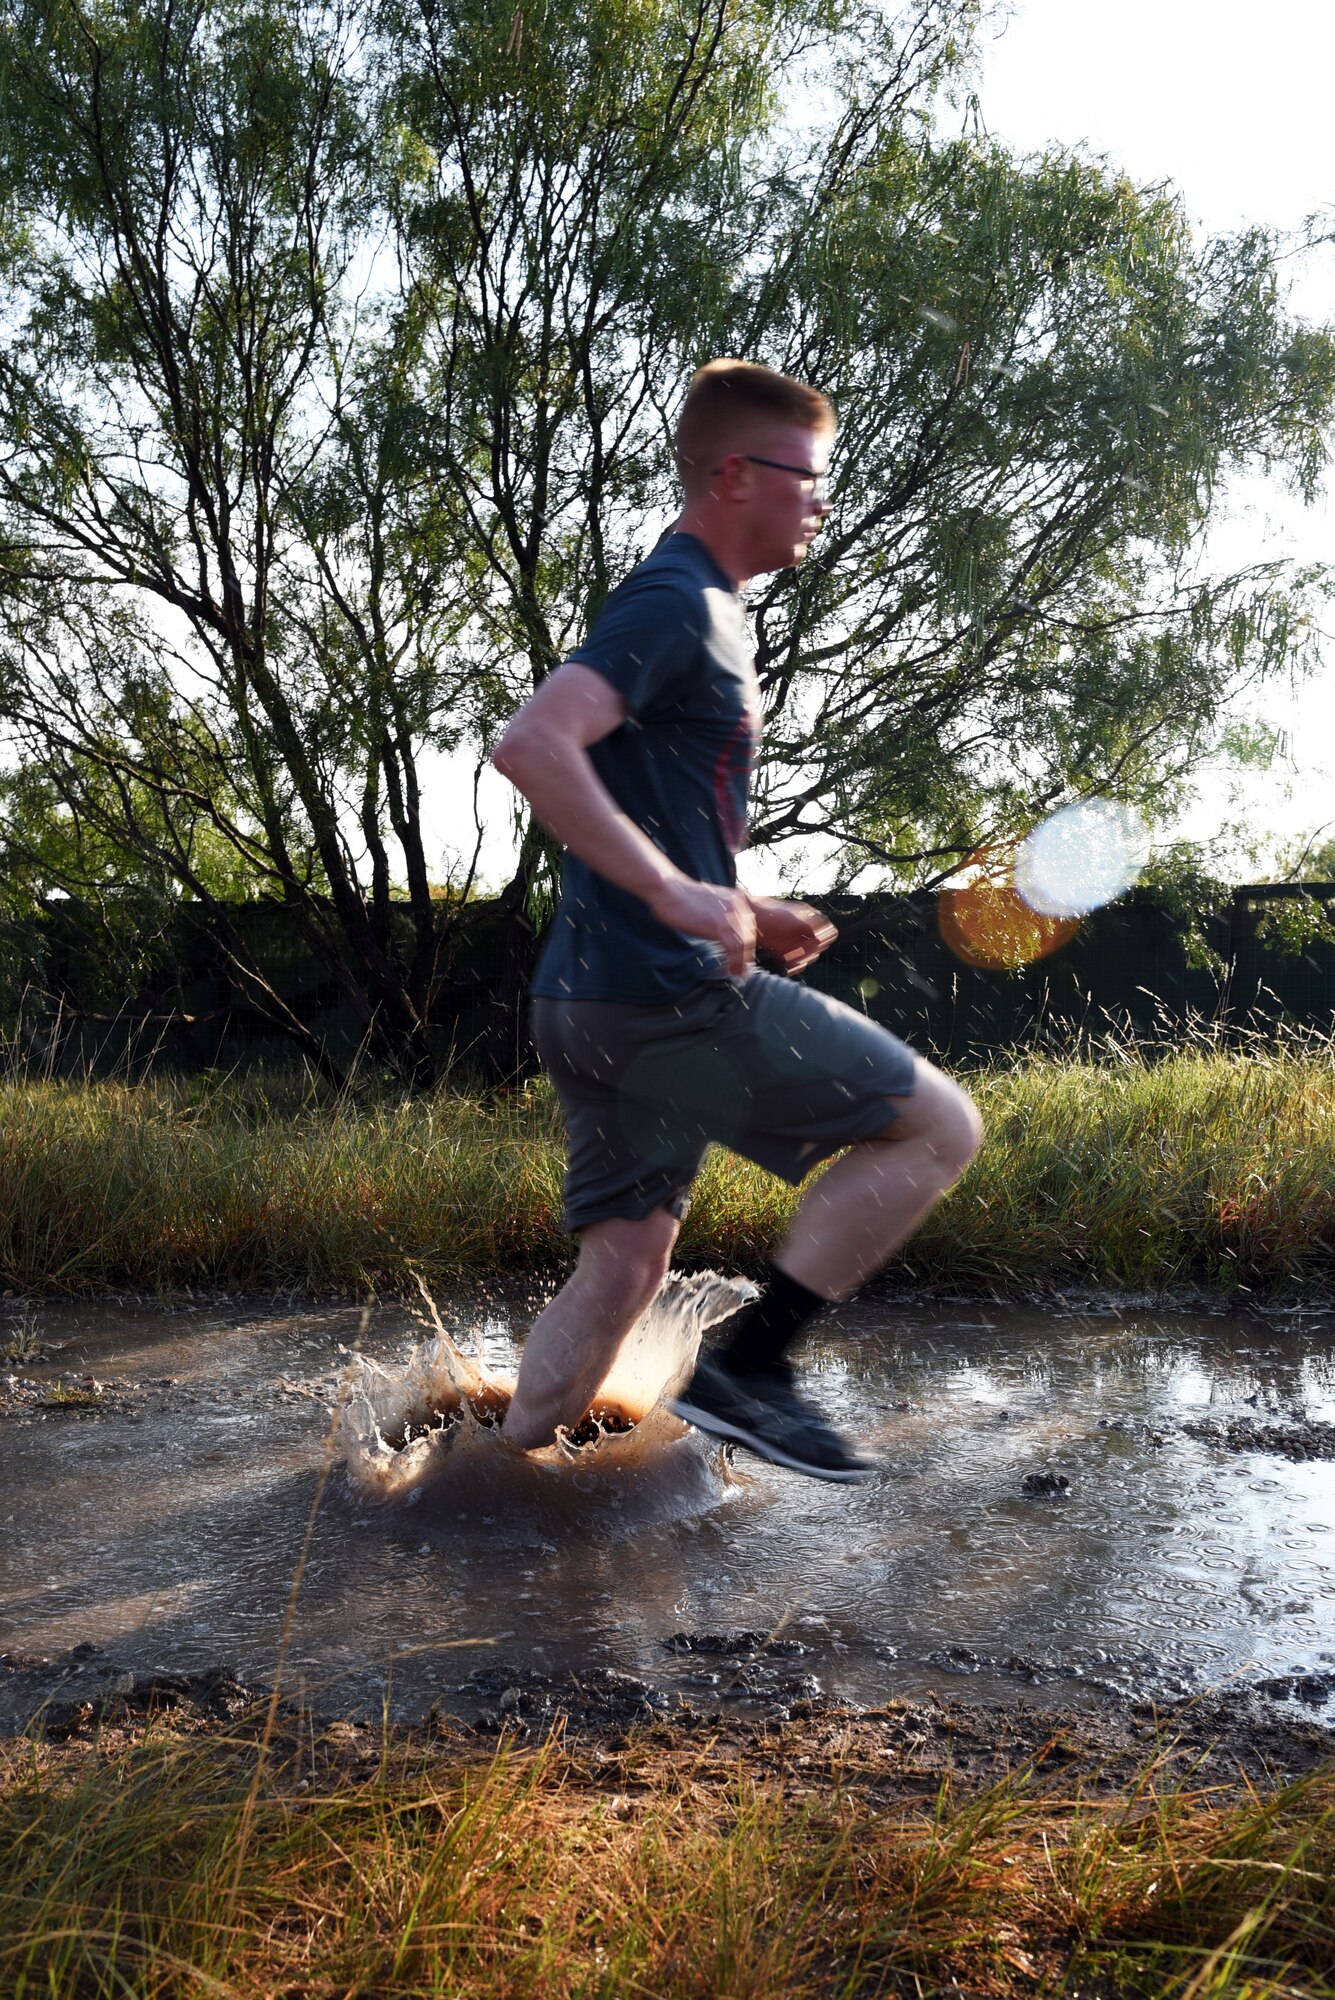 U.S. Army Pvt. Conner McCage, 344th Military Intelligence Battalion trainee, runs through a puddle during the 344th MI BN mud run at the Camp Sentinel training area on Goodfellow Air Force Base, Texas, July 7, 2018. Besides running through puddles, participants in the mud run also had to jump barriers, climb a dirt hill and perform a low crawl. (U.S. Air Force photo by Staff Sgt. Joshua Edwards/Released)